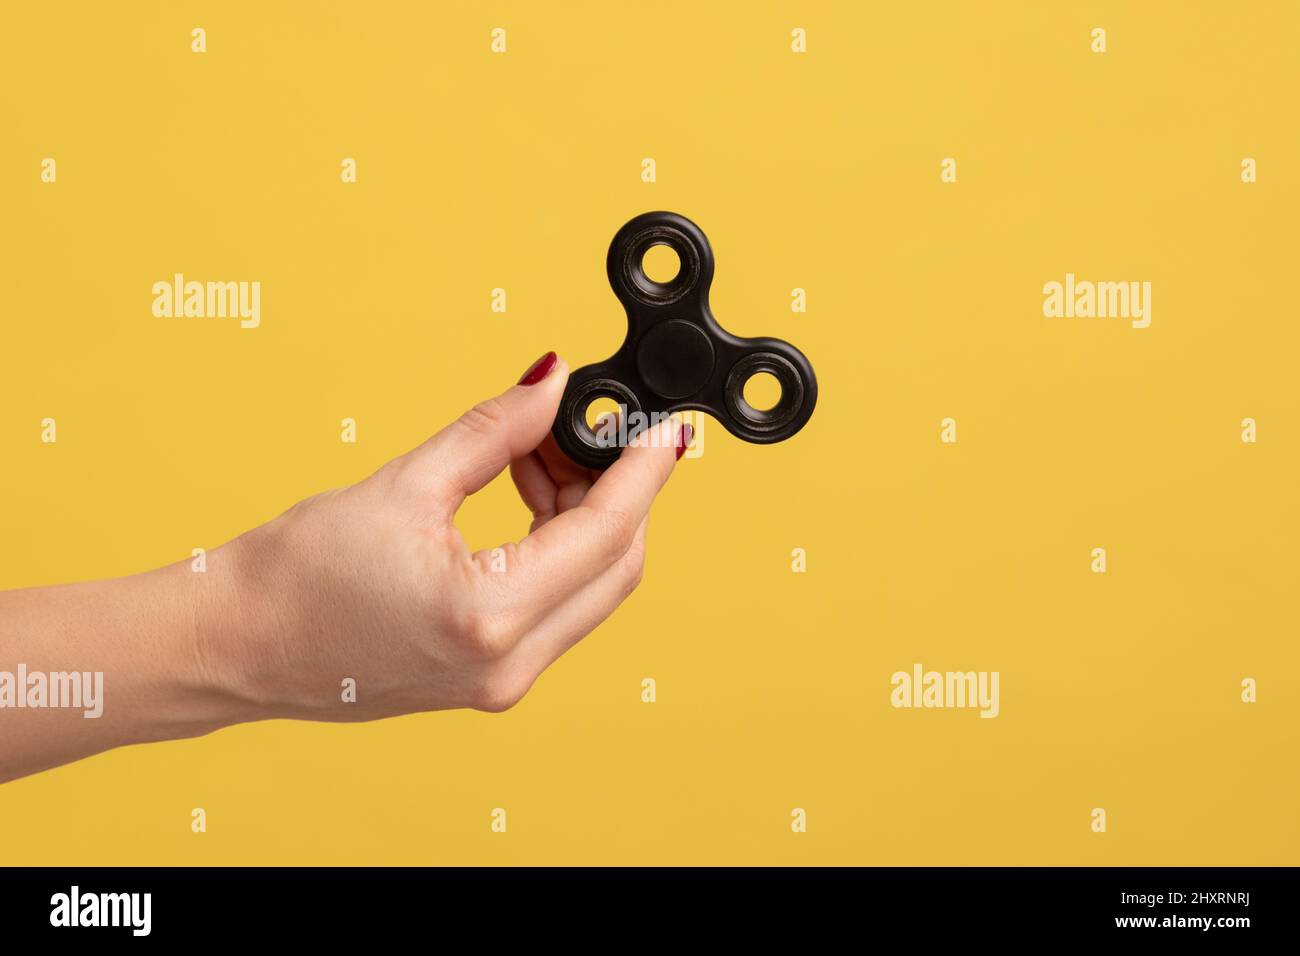 Closeup side view profile portrait of woman hand holding black fidget spinner, stress relieving toy. Indoor studio shot isolated on yellow background. Stock Photo